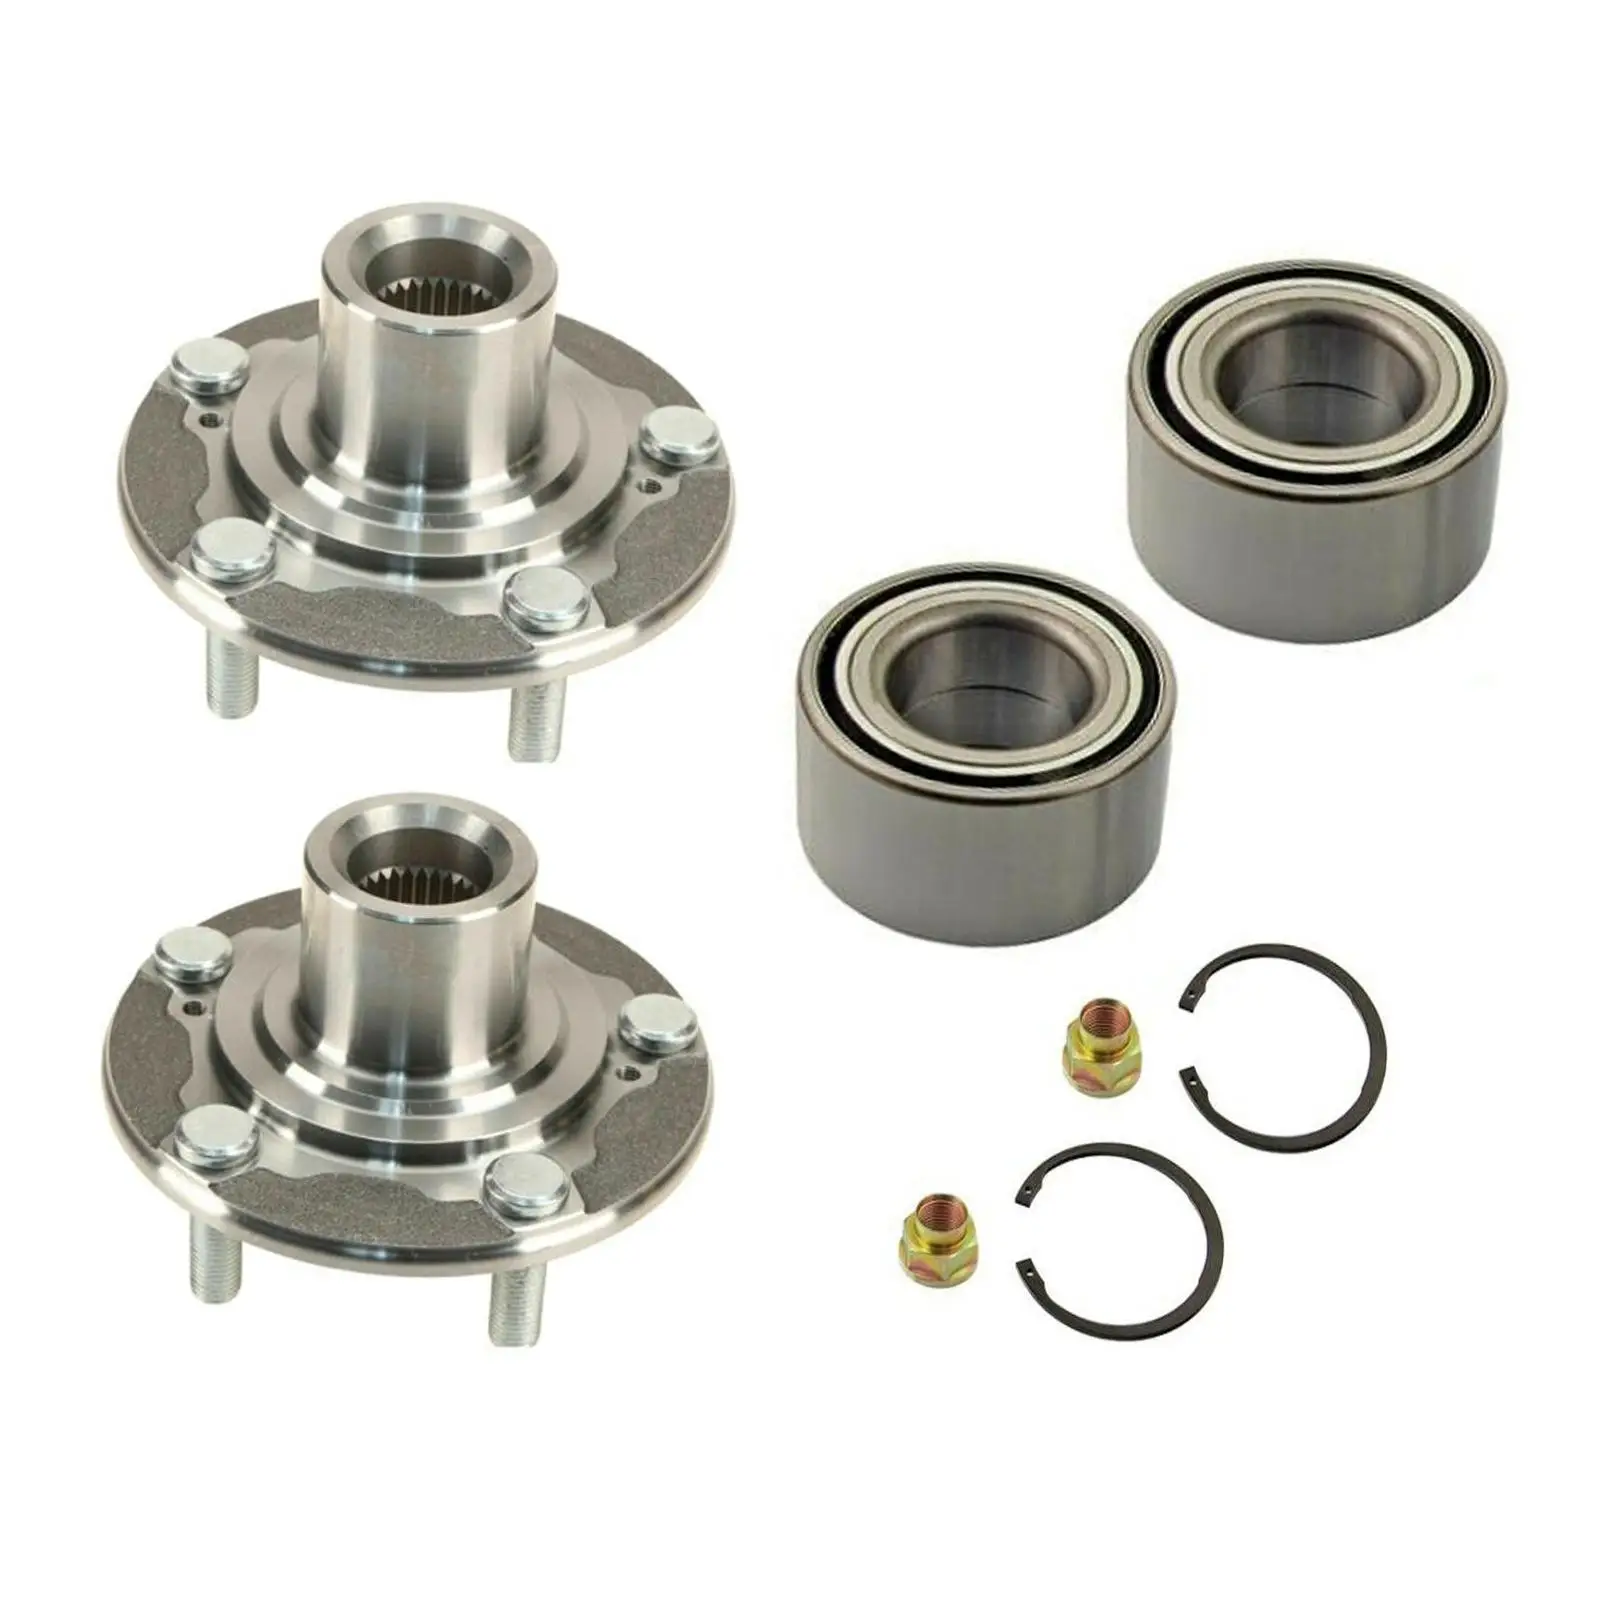 2x Front Wheel Hub and Bearing Repair Kits Professional Easy to Install with Retaining Clips Nuts 510118 for Honda Accord